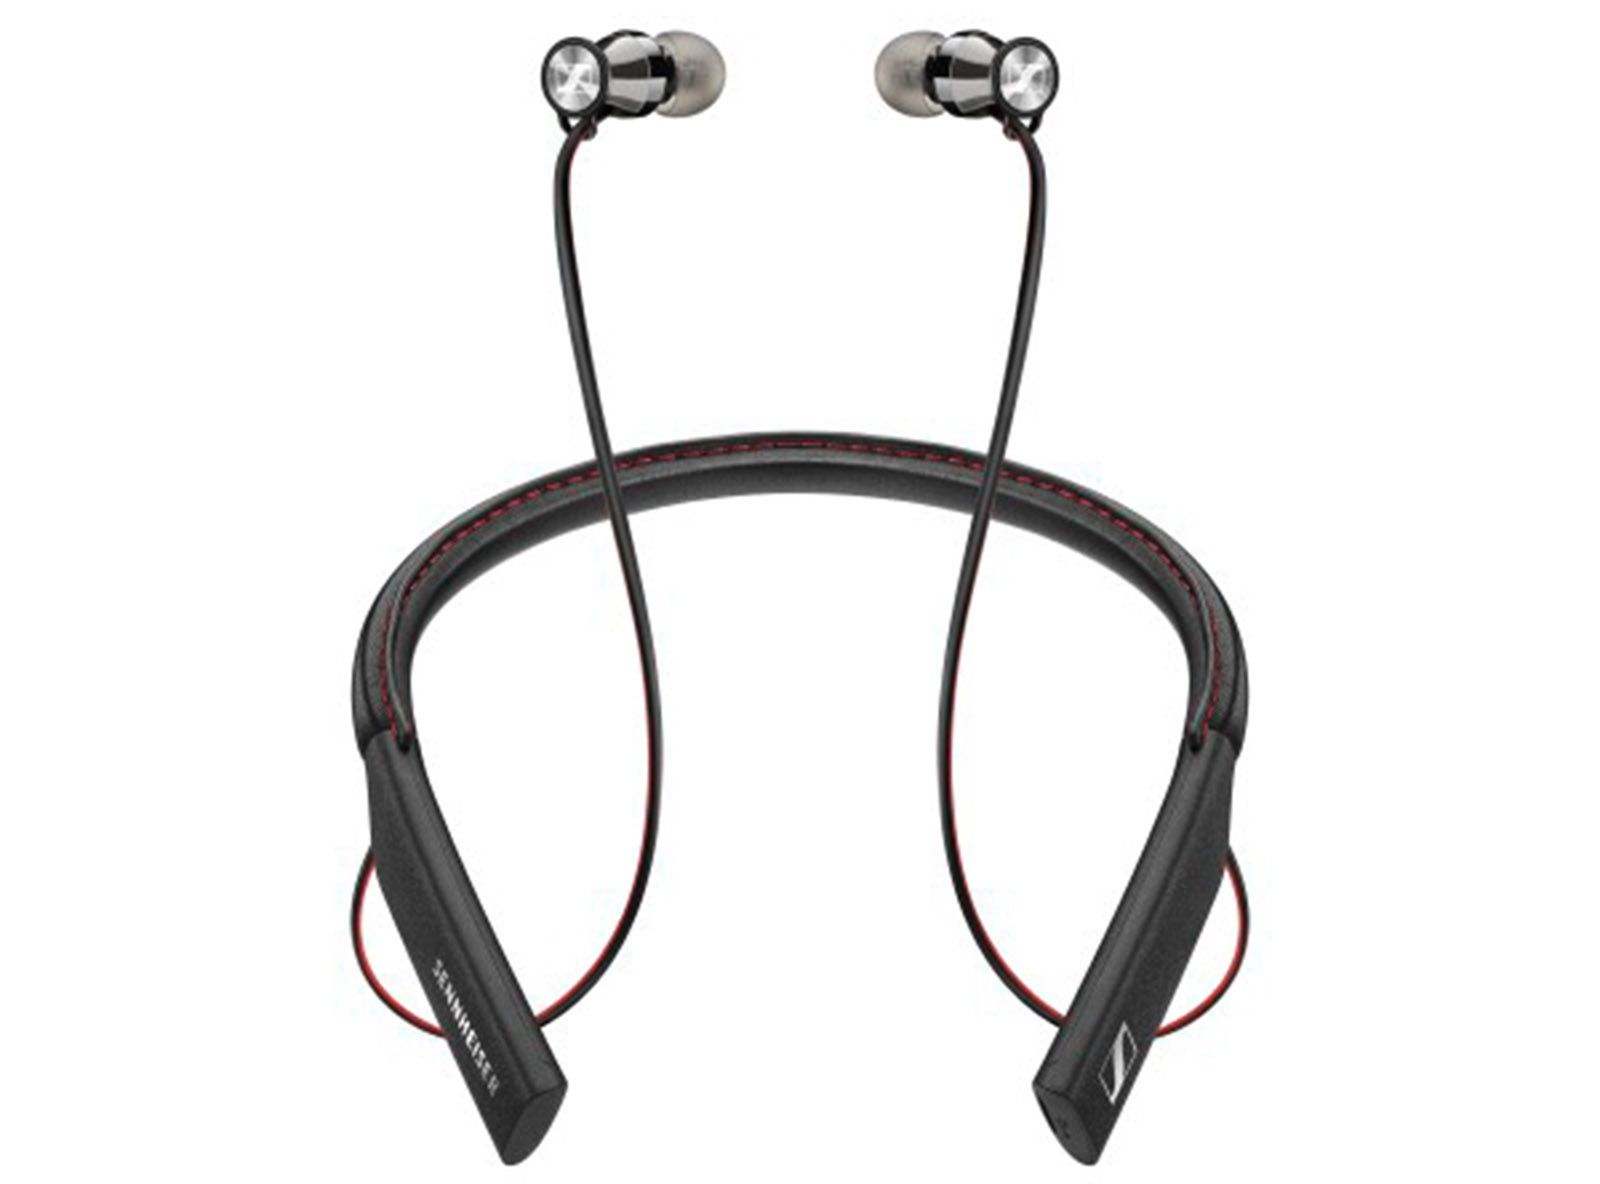 sennheiser cuts the cord on momentum in ear headphones releases two new pairs of over ears image 2